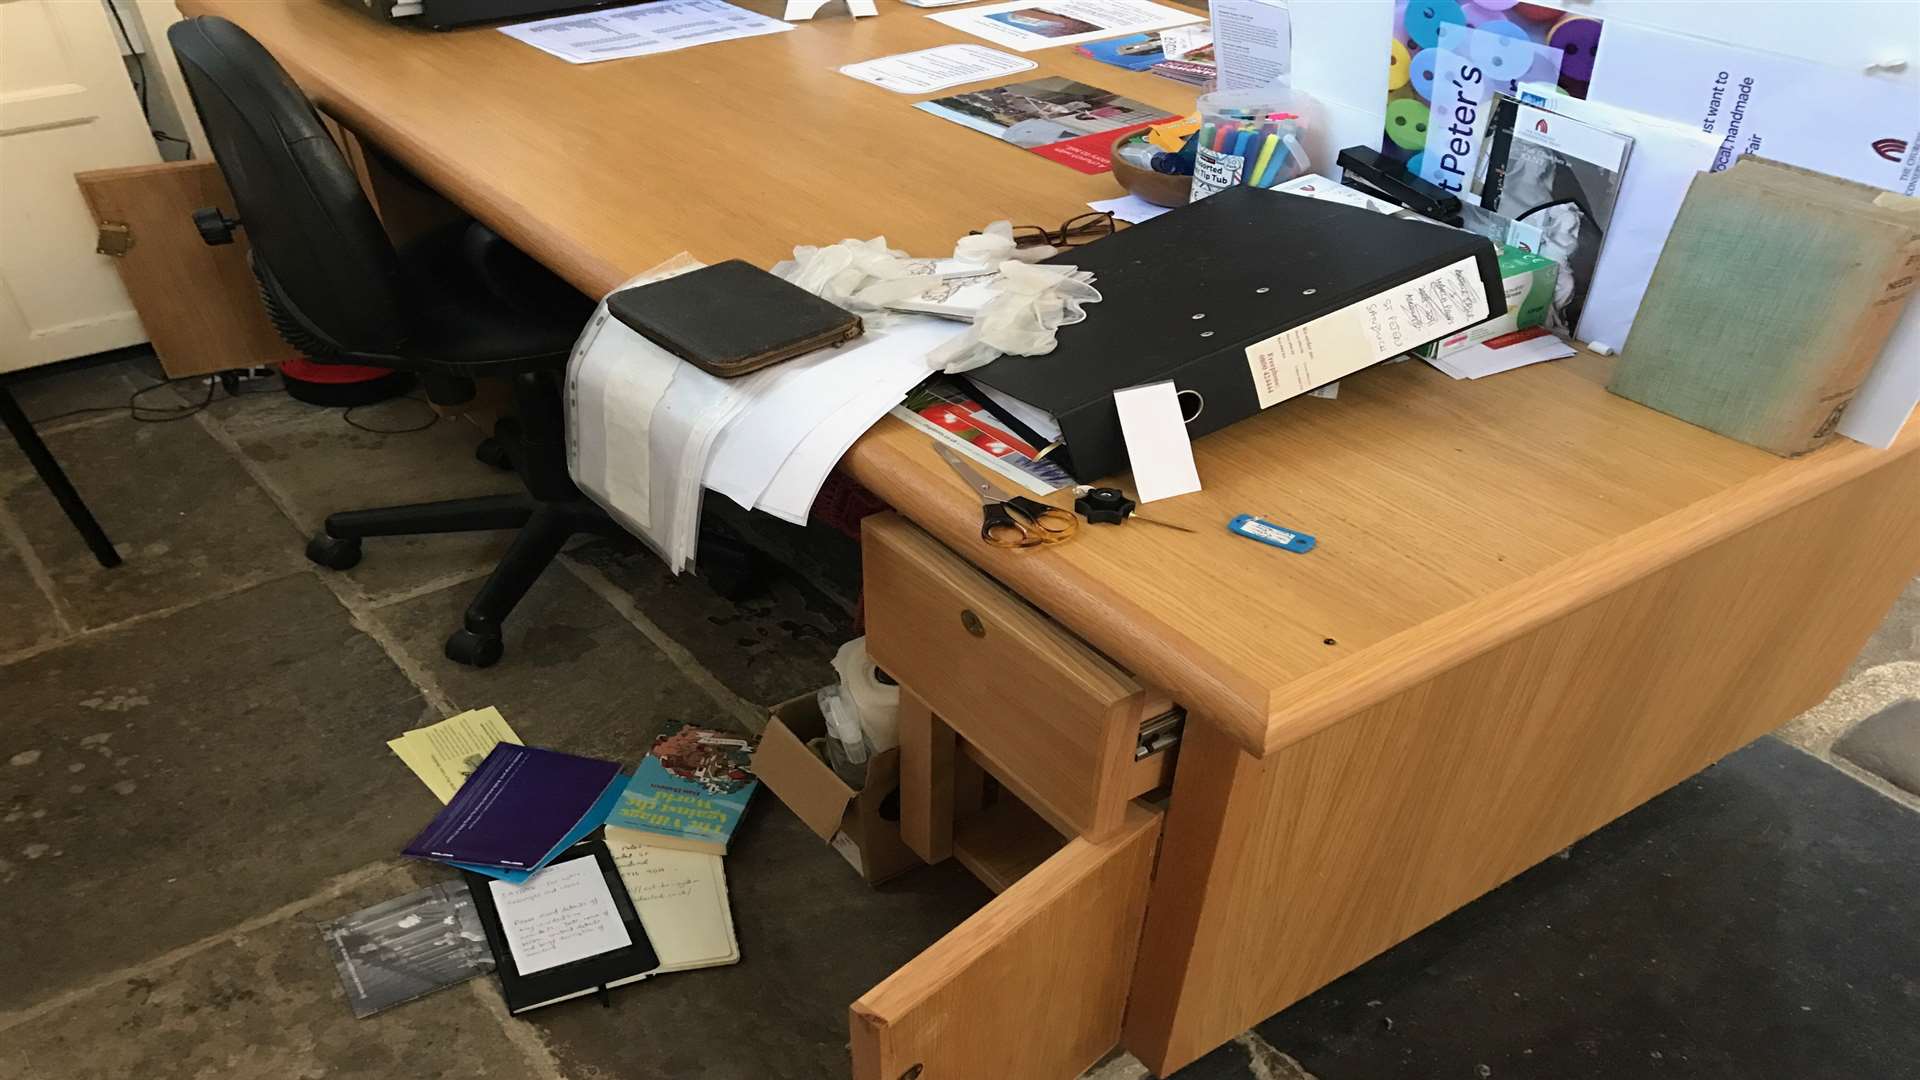 A desk was ransacked